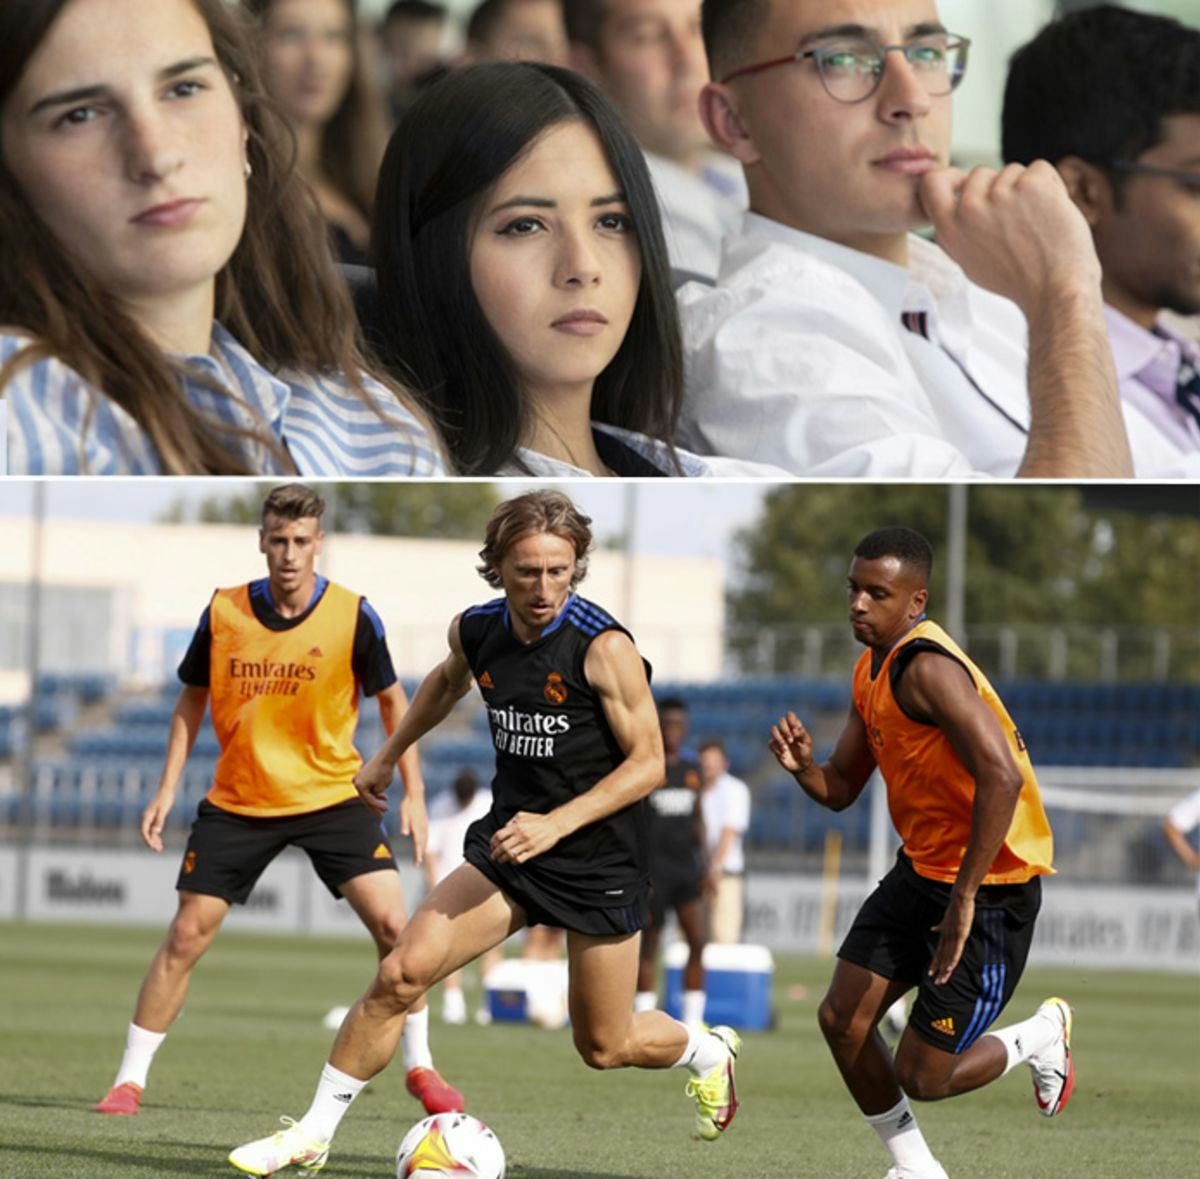 diptych of soccer players and audience members at a stadium